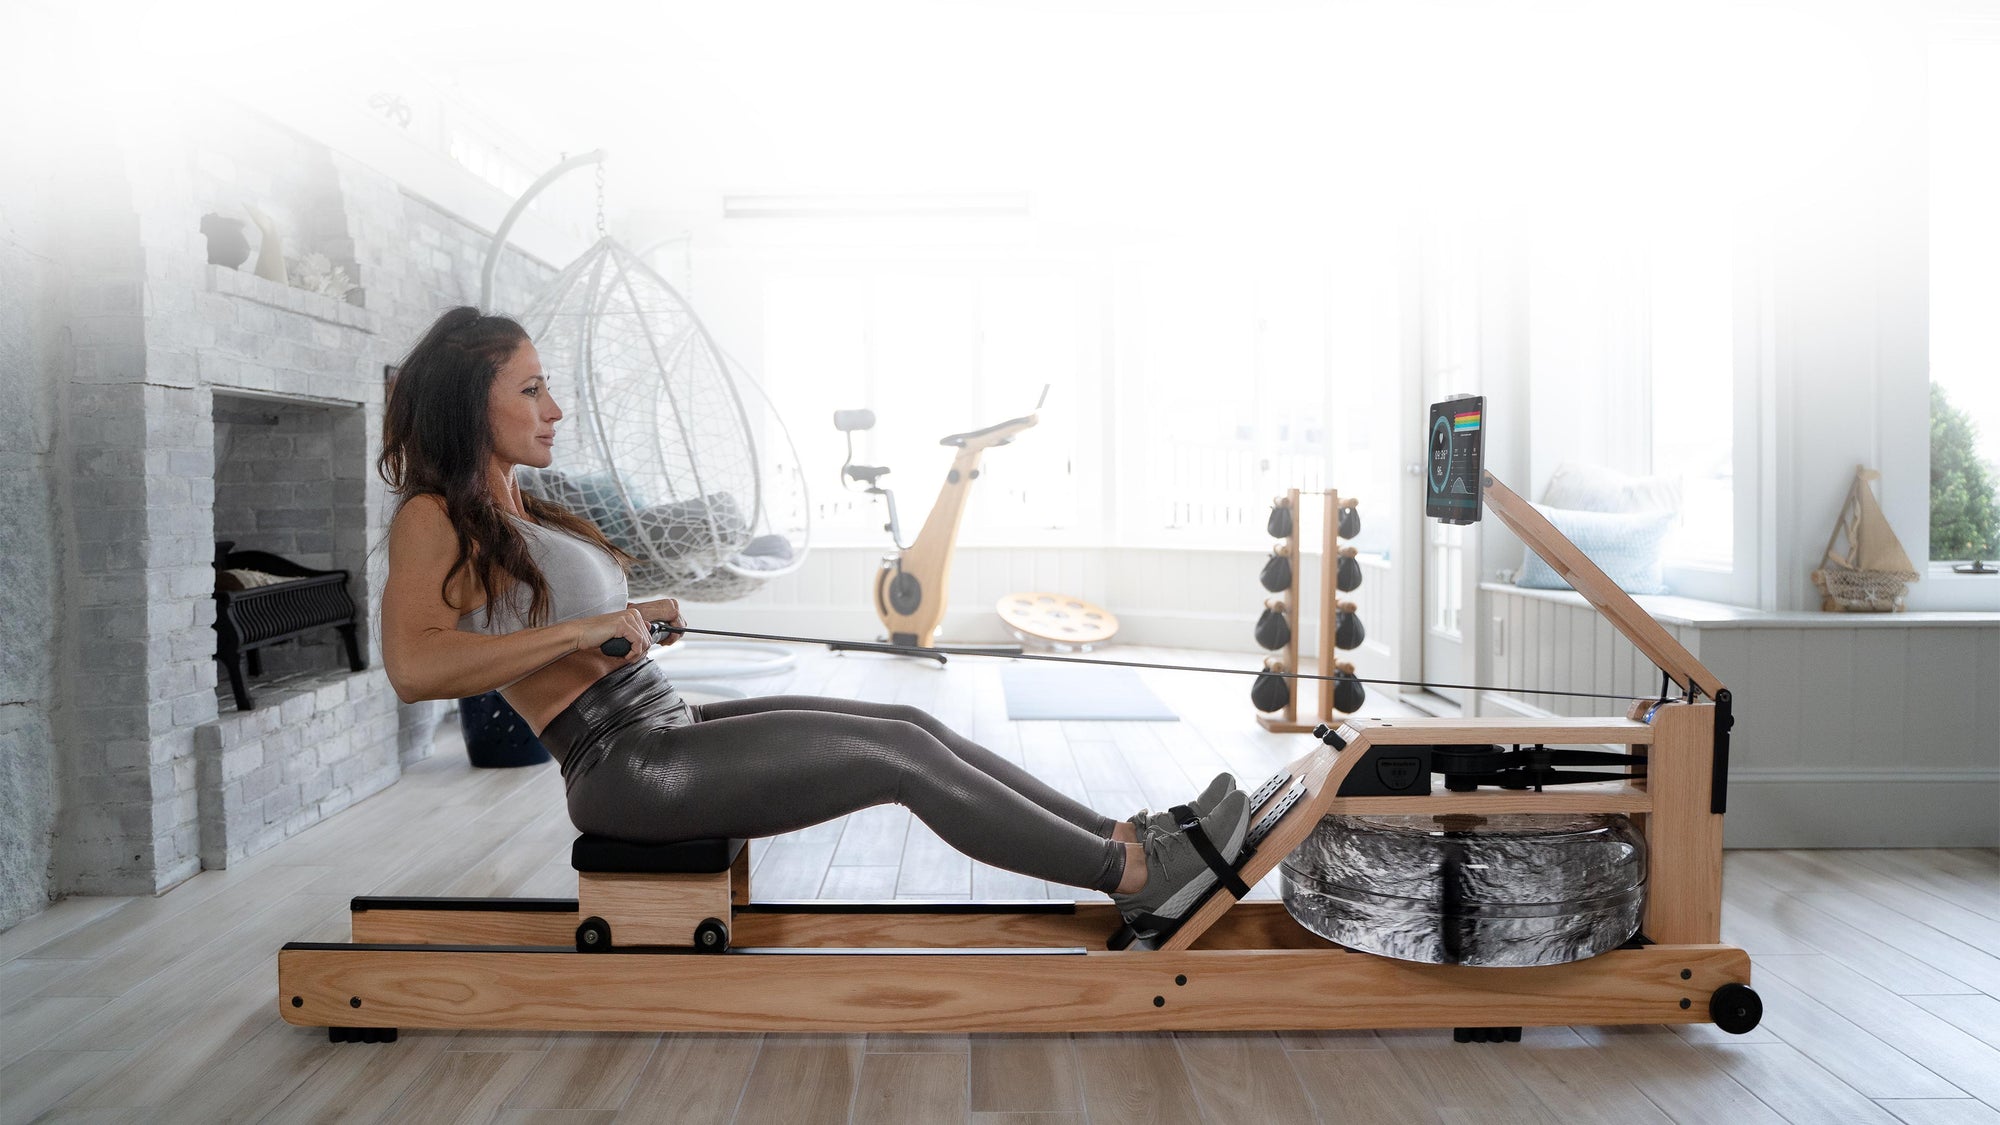 WHY BUY A WATERROWER